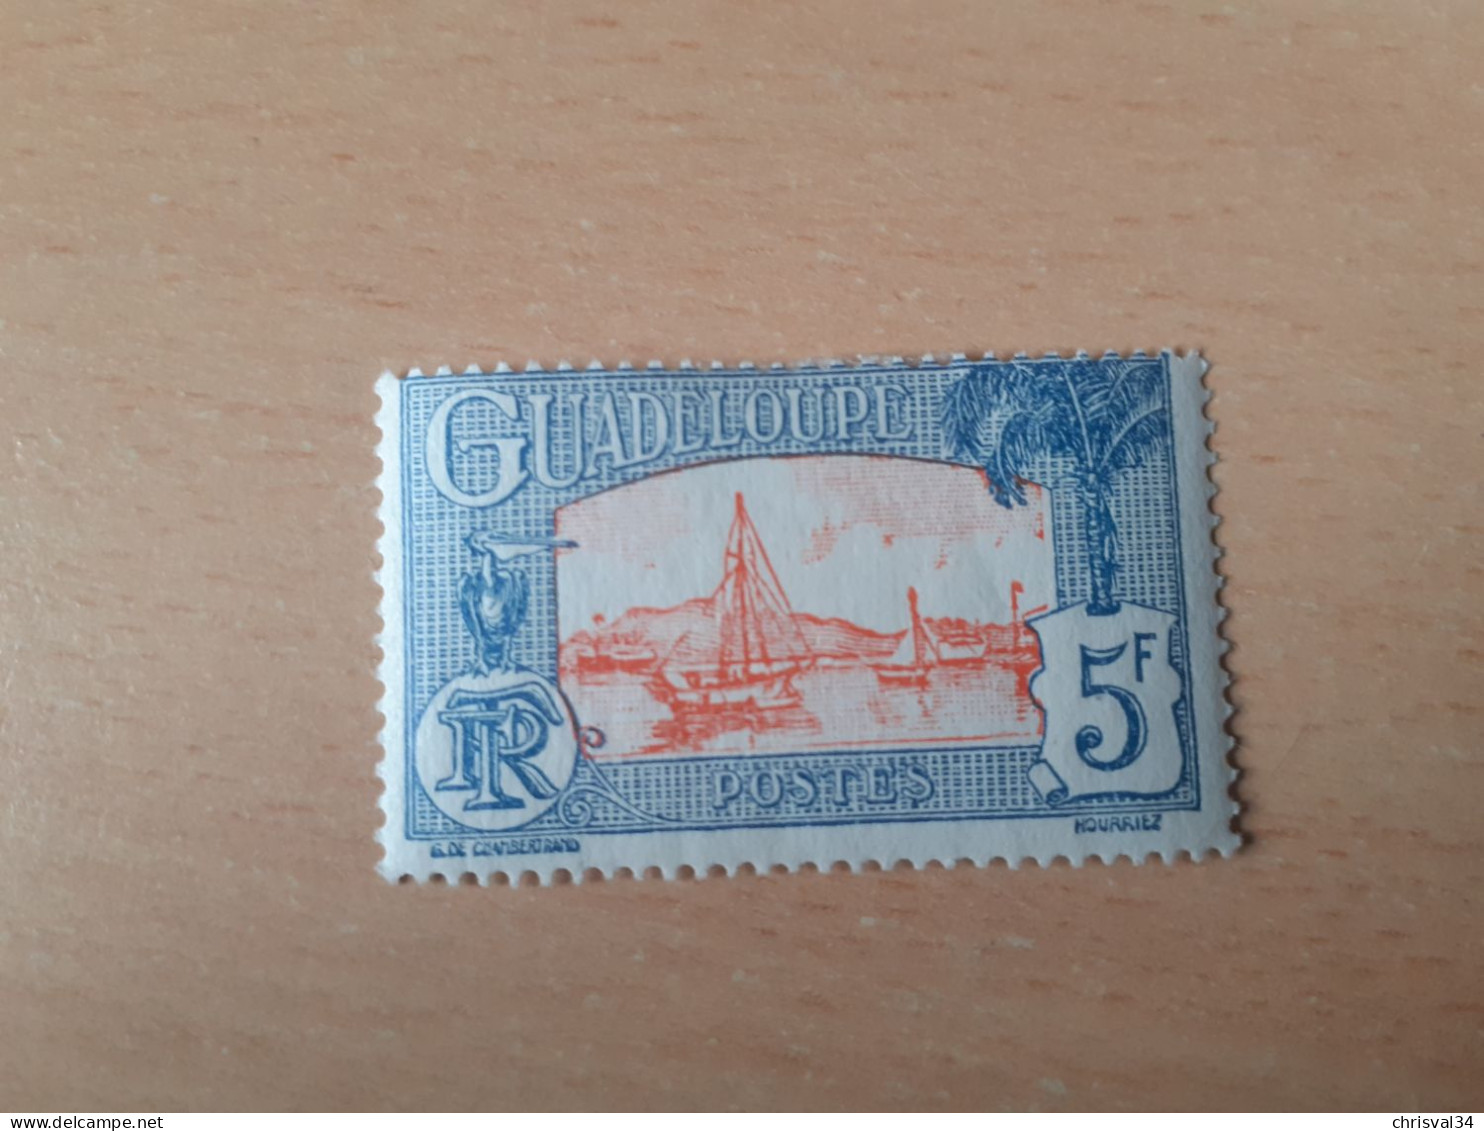 TIMBRE   GUADELOUPE       N  120    COTE  1,25   EUROS  NEUF  TRACE  CHARNIERE - Neufs